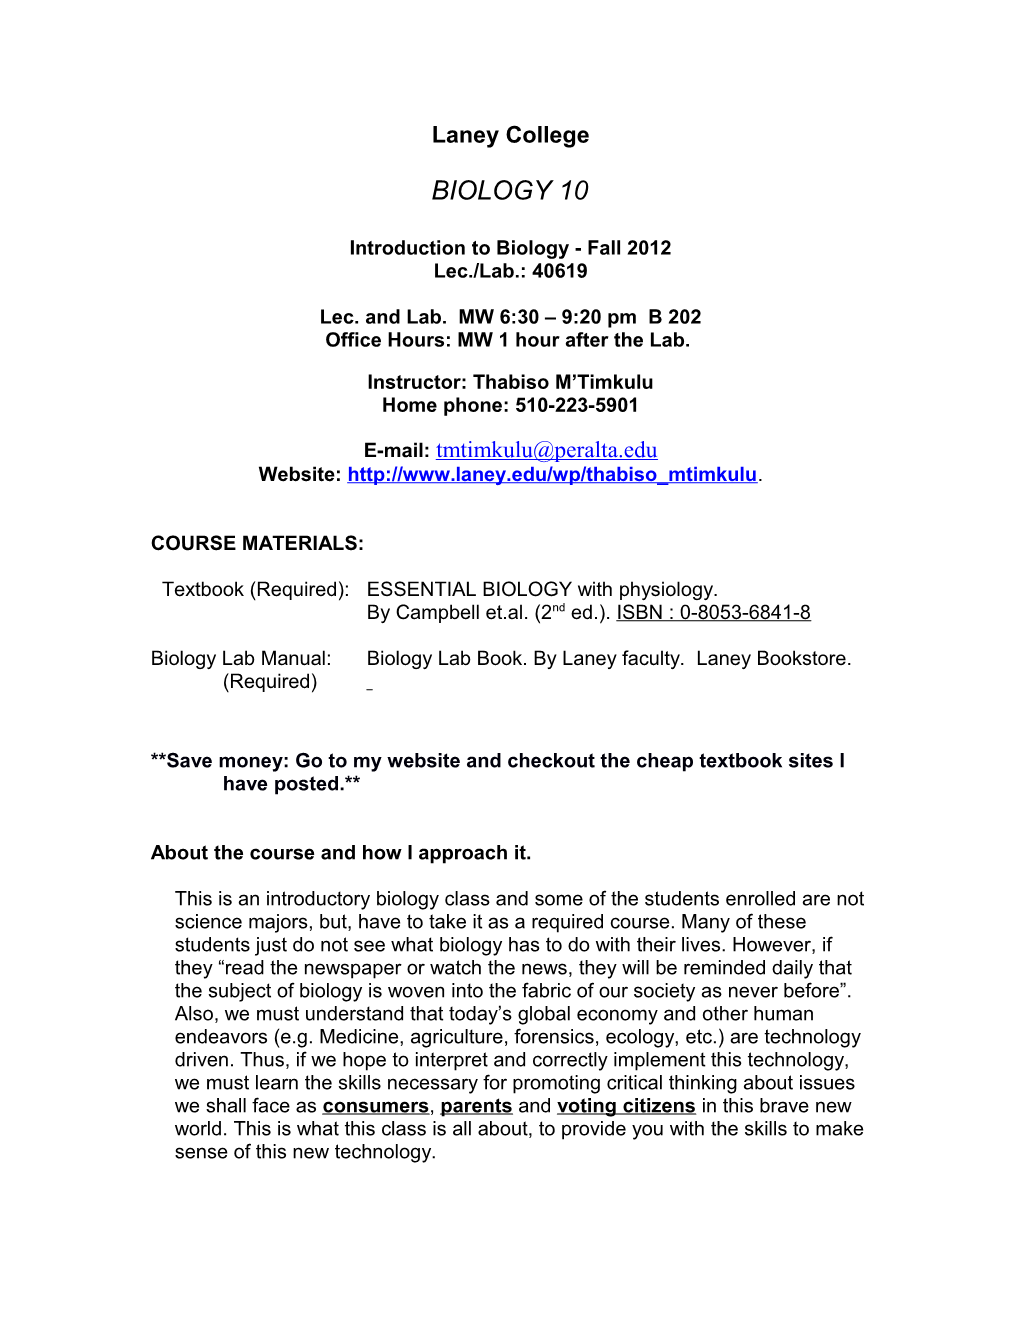 Introduction to Biology - Fall 2012